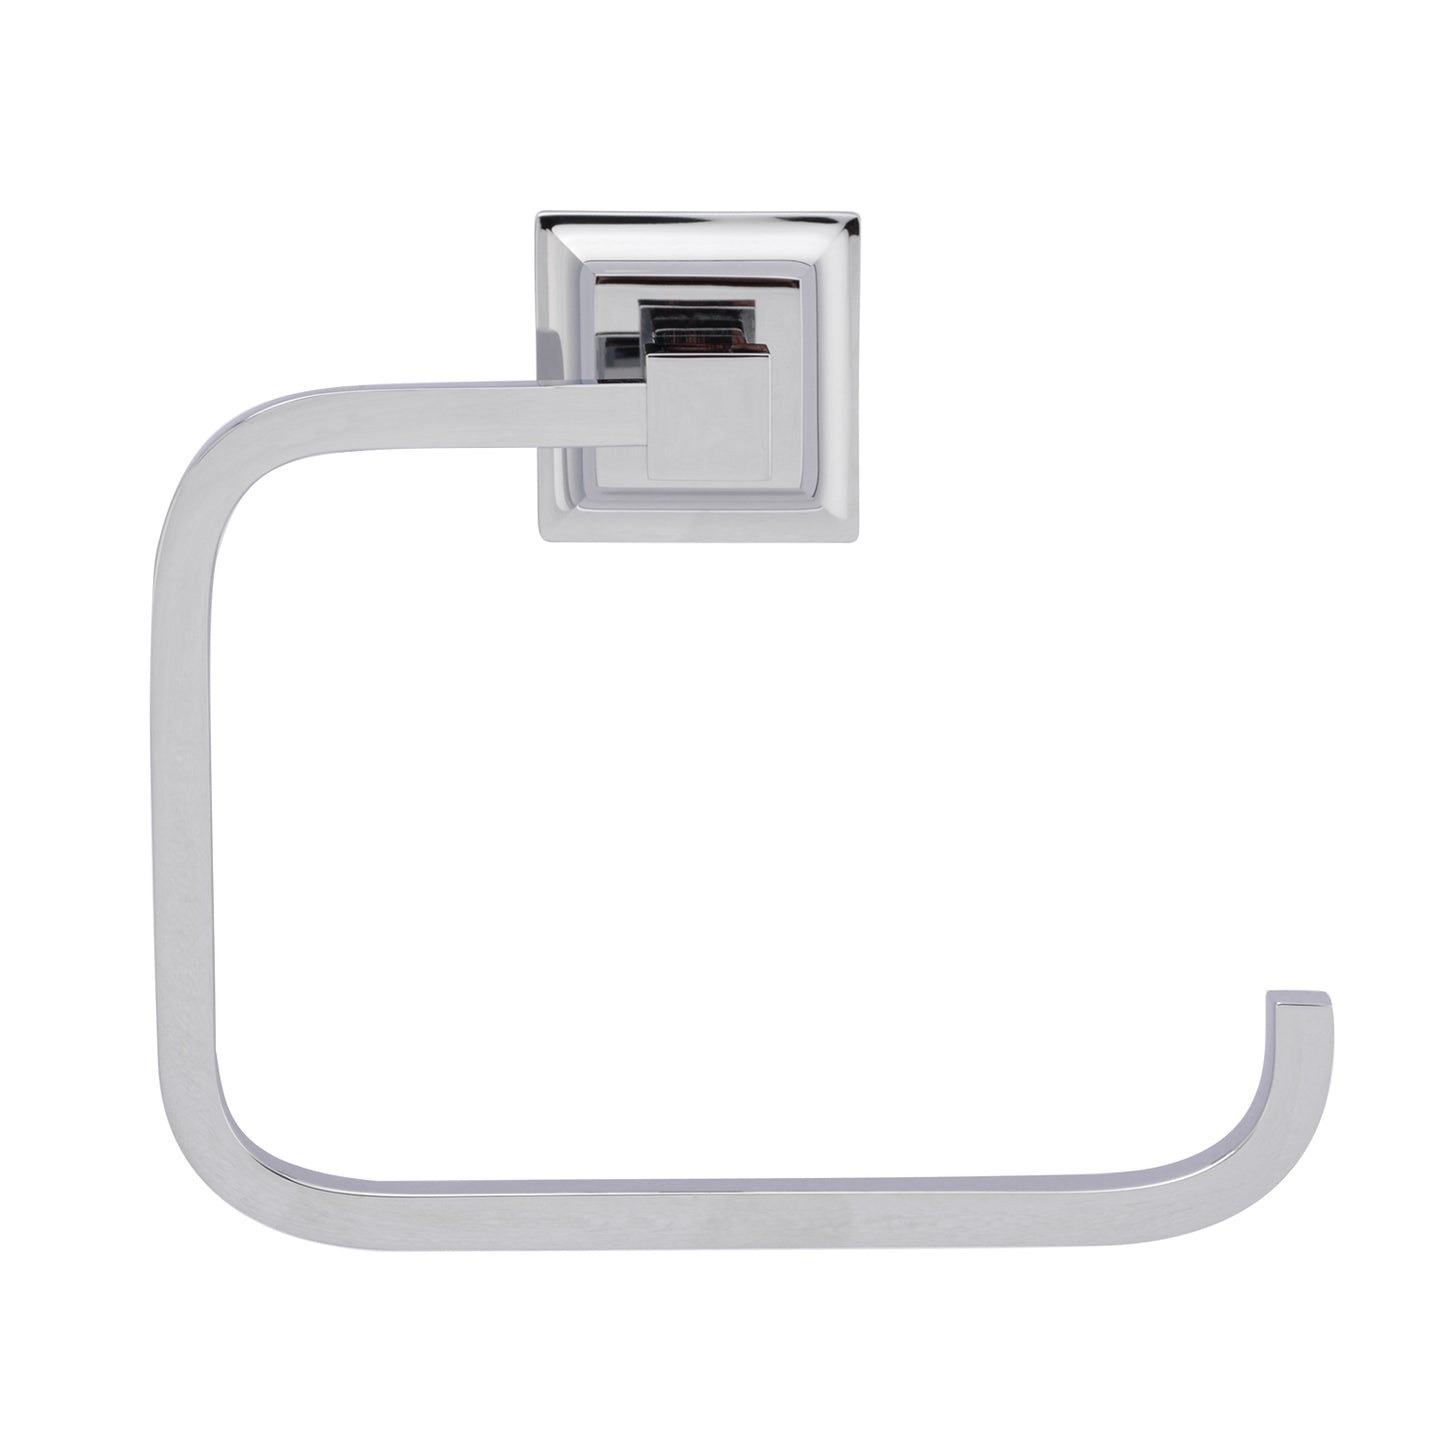 Stanton Towel Ring in Polished Chrome